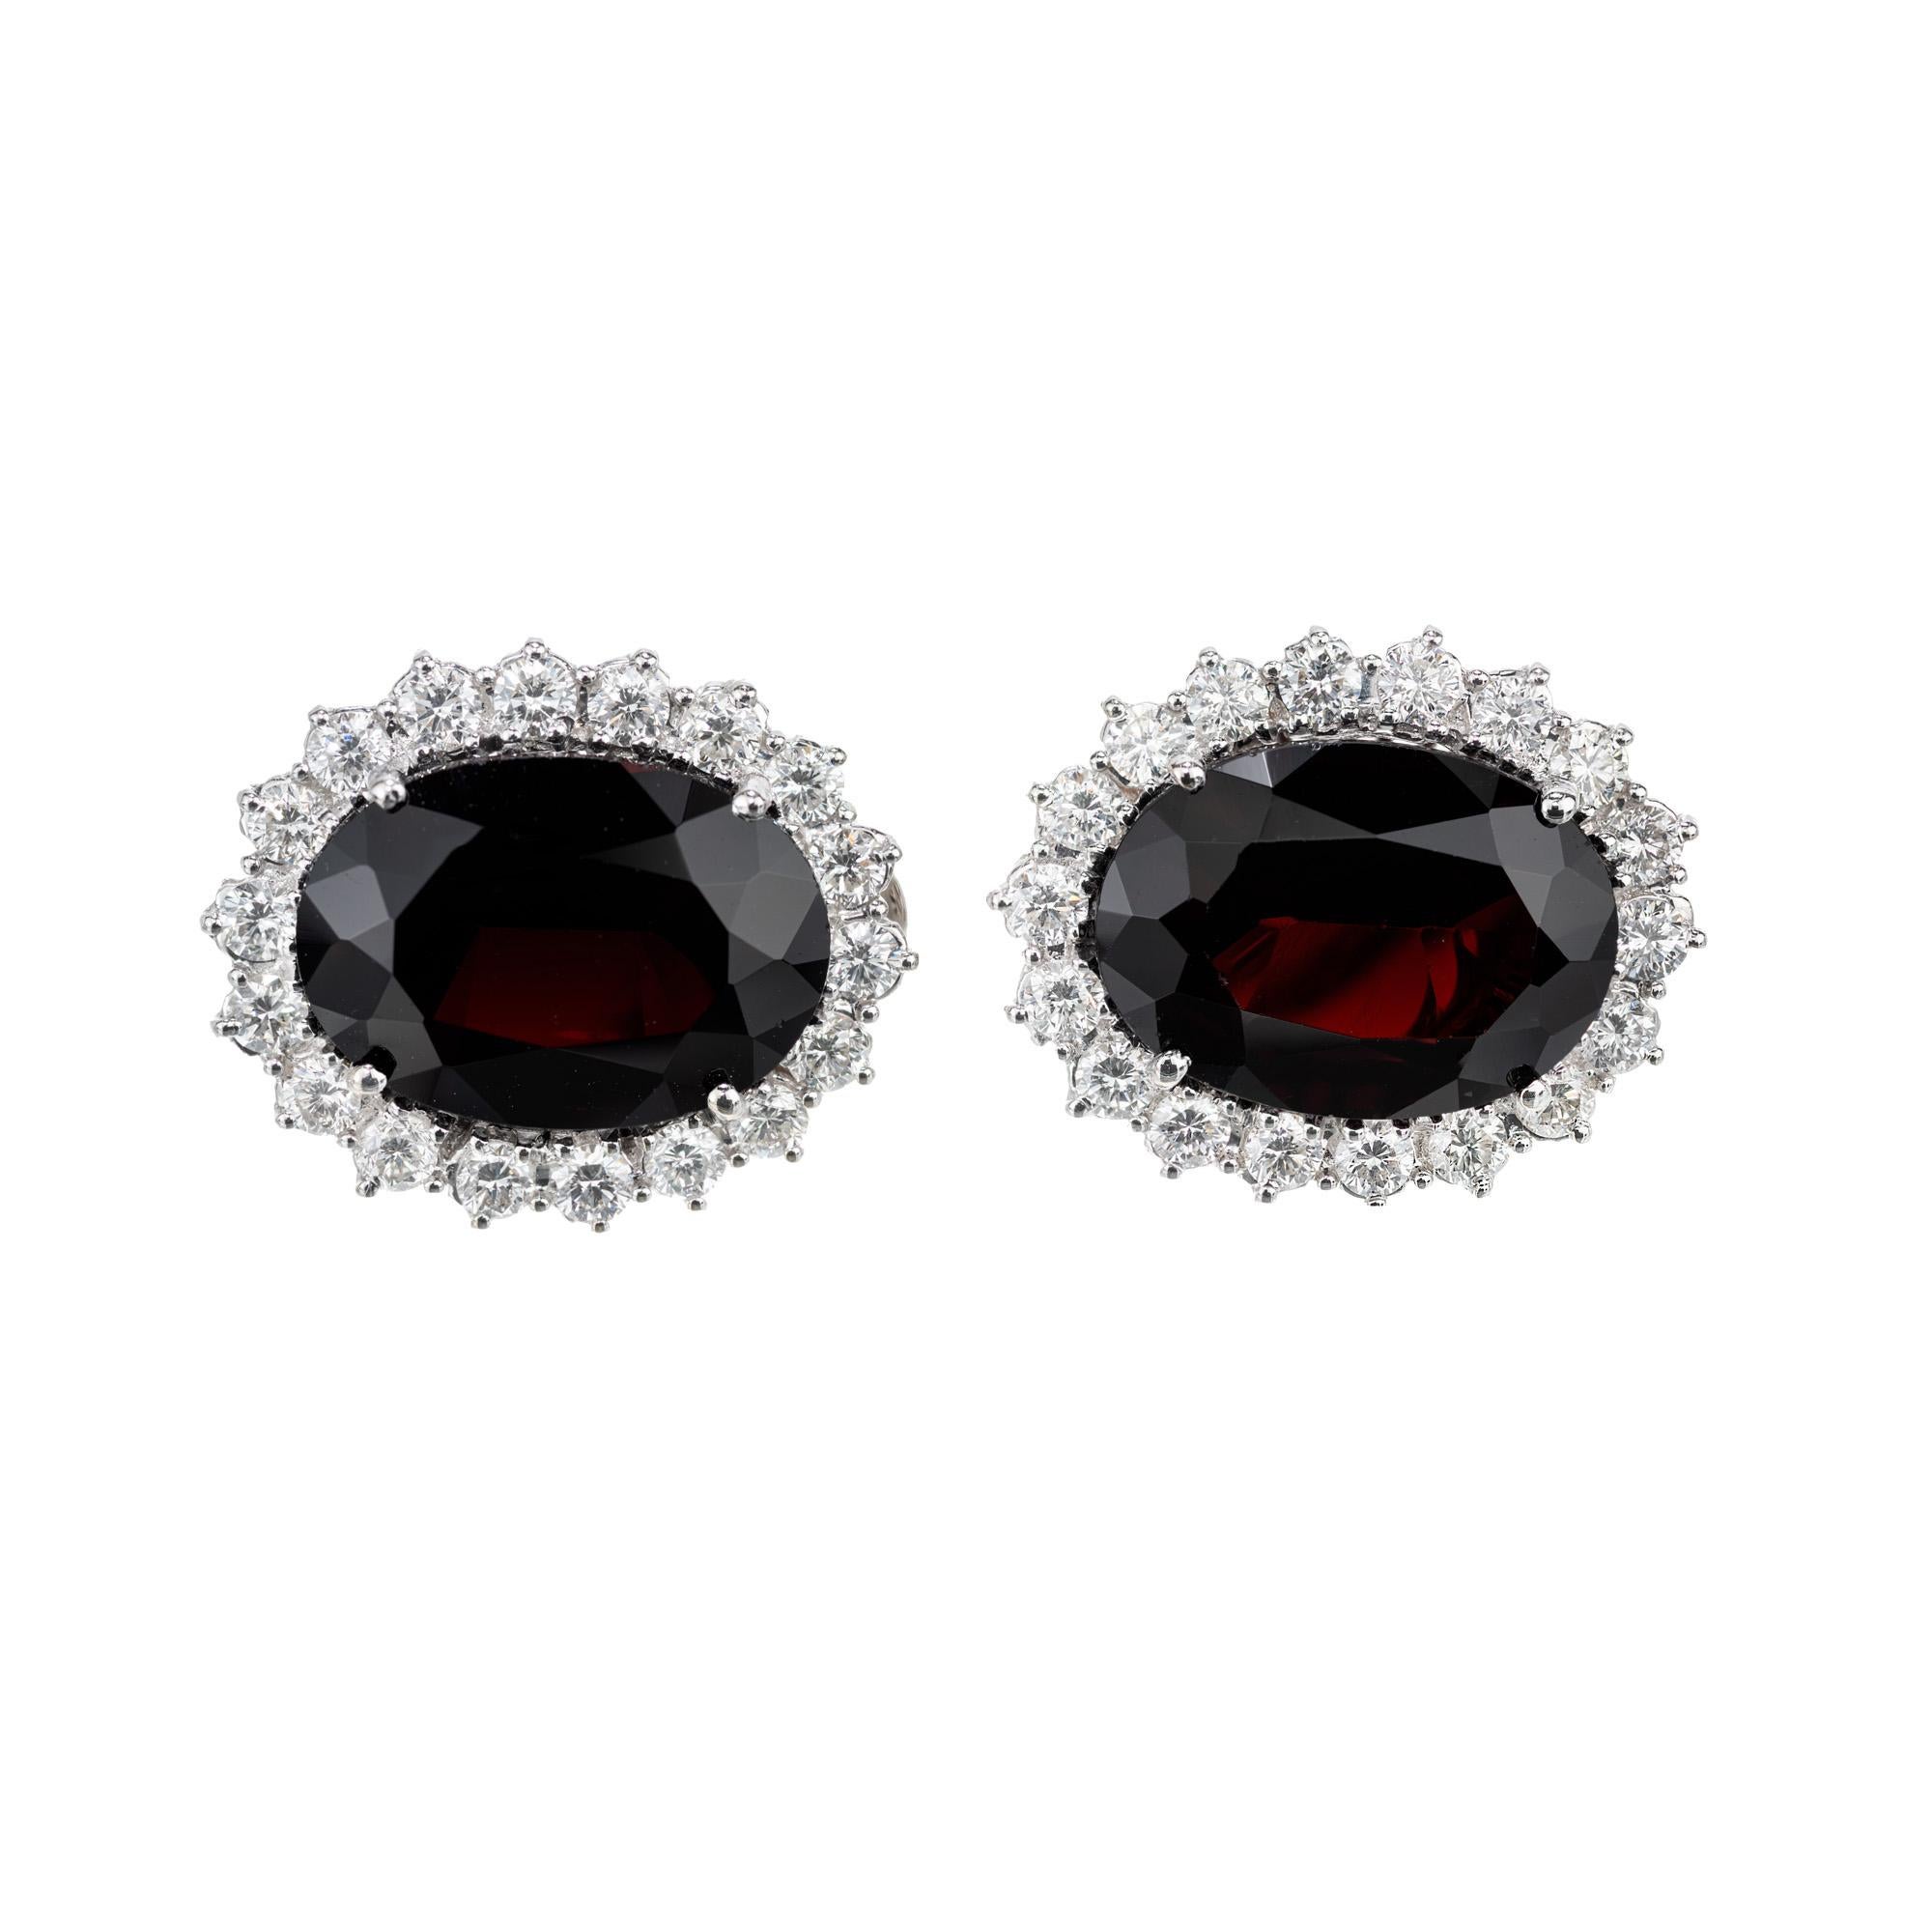 Richly deep reddish and brown garnet and diamond earrings. 2 Oval cut garnets totaling 12.00cts set in 18k white gold clip post settings both with 1.62cts of round brilliant cut diamond halos.

2 oval brownish red garnets, approx. 12.00cts
36 round